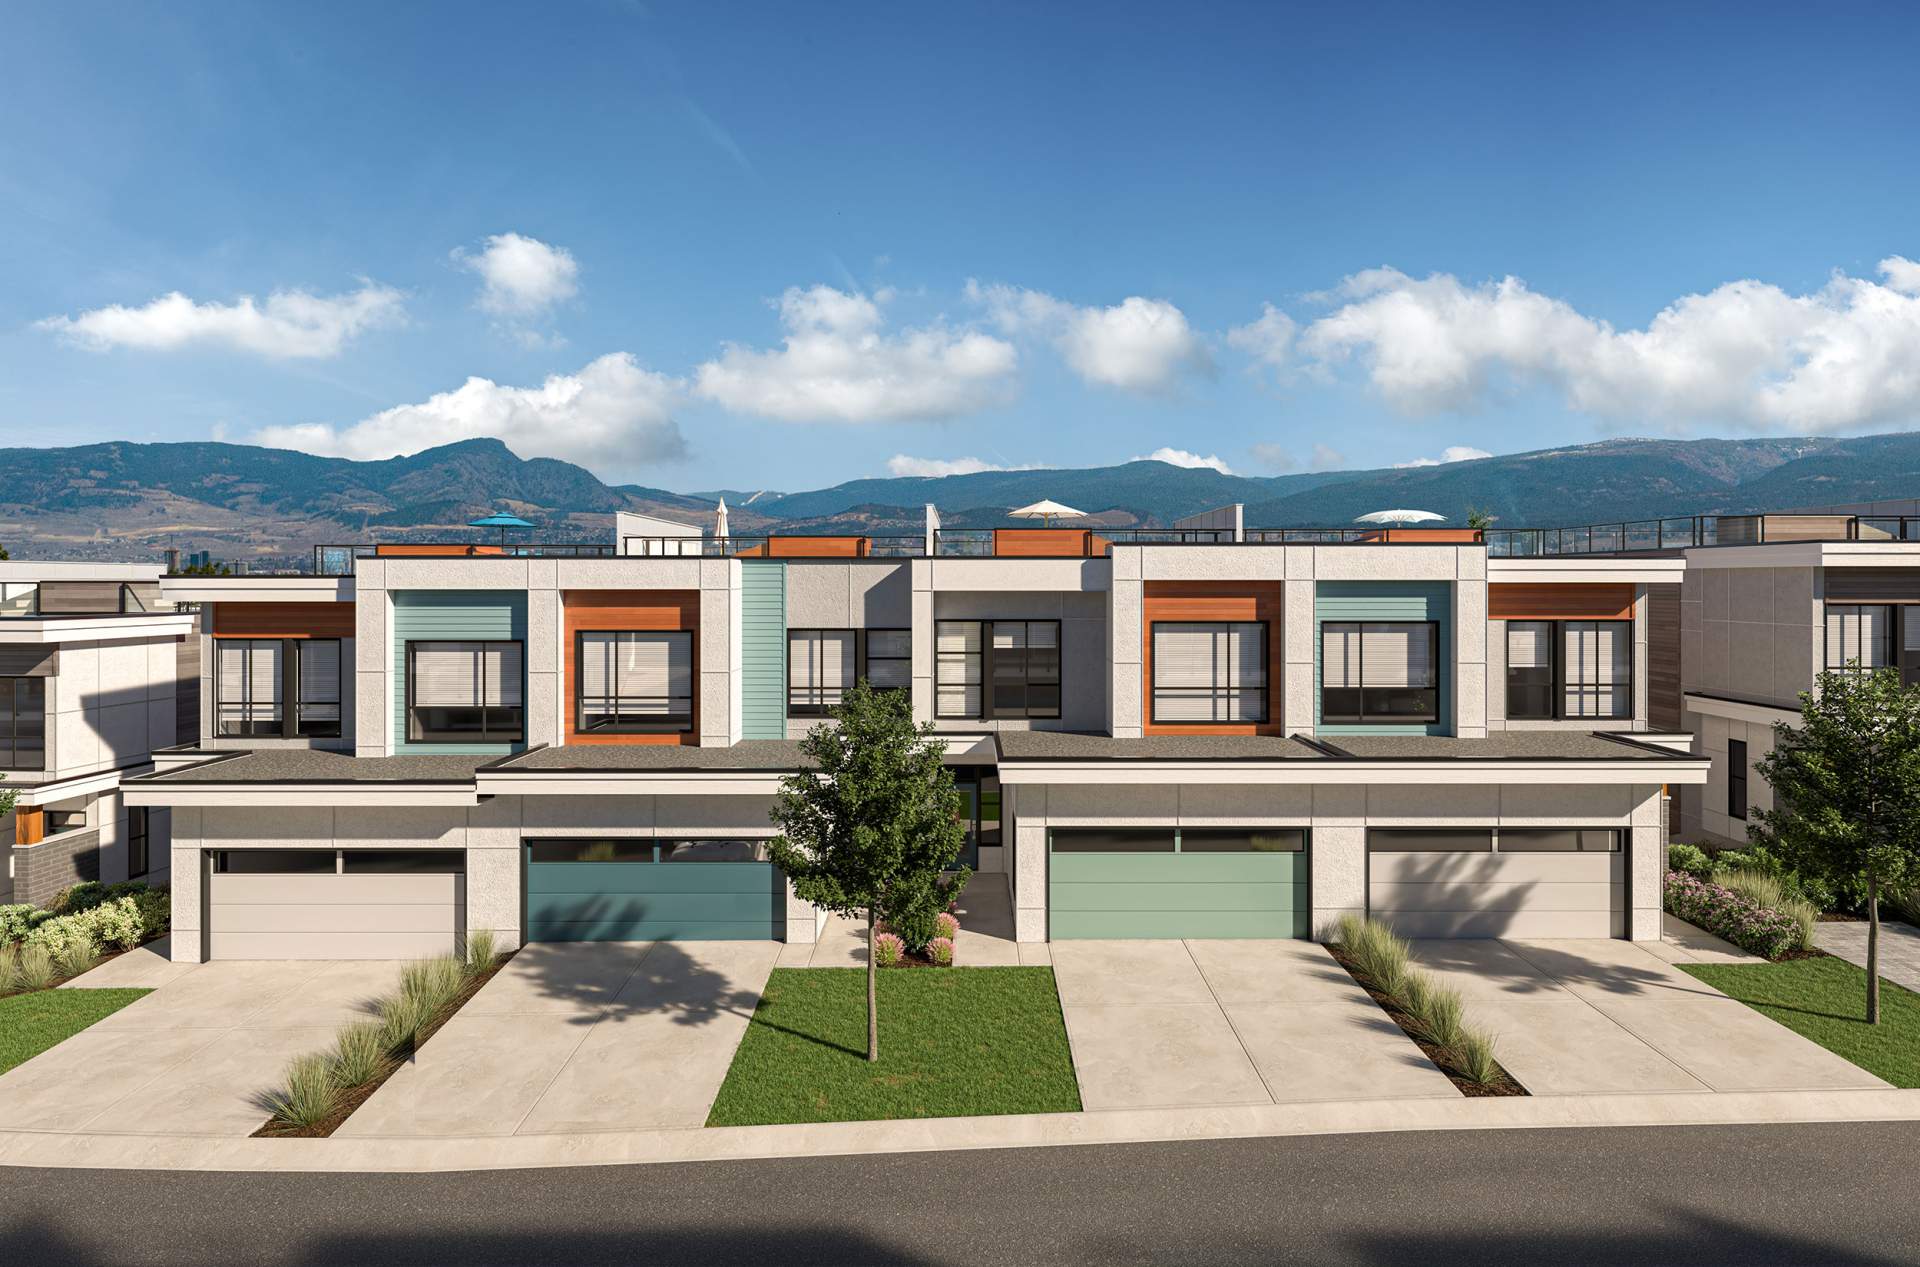 A collection of 108 West Kelowna townhomes with spacious rooftop decks.